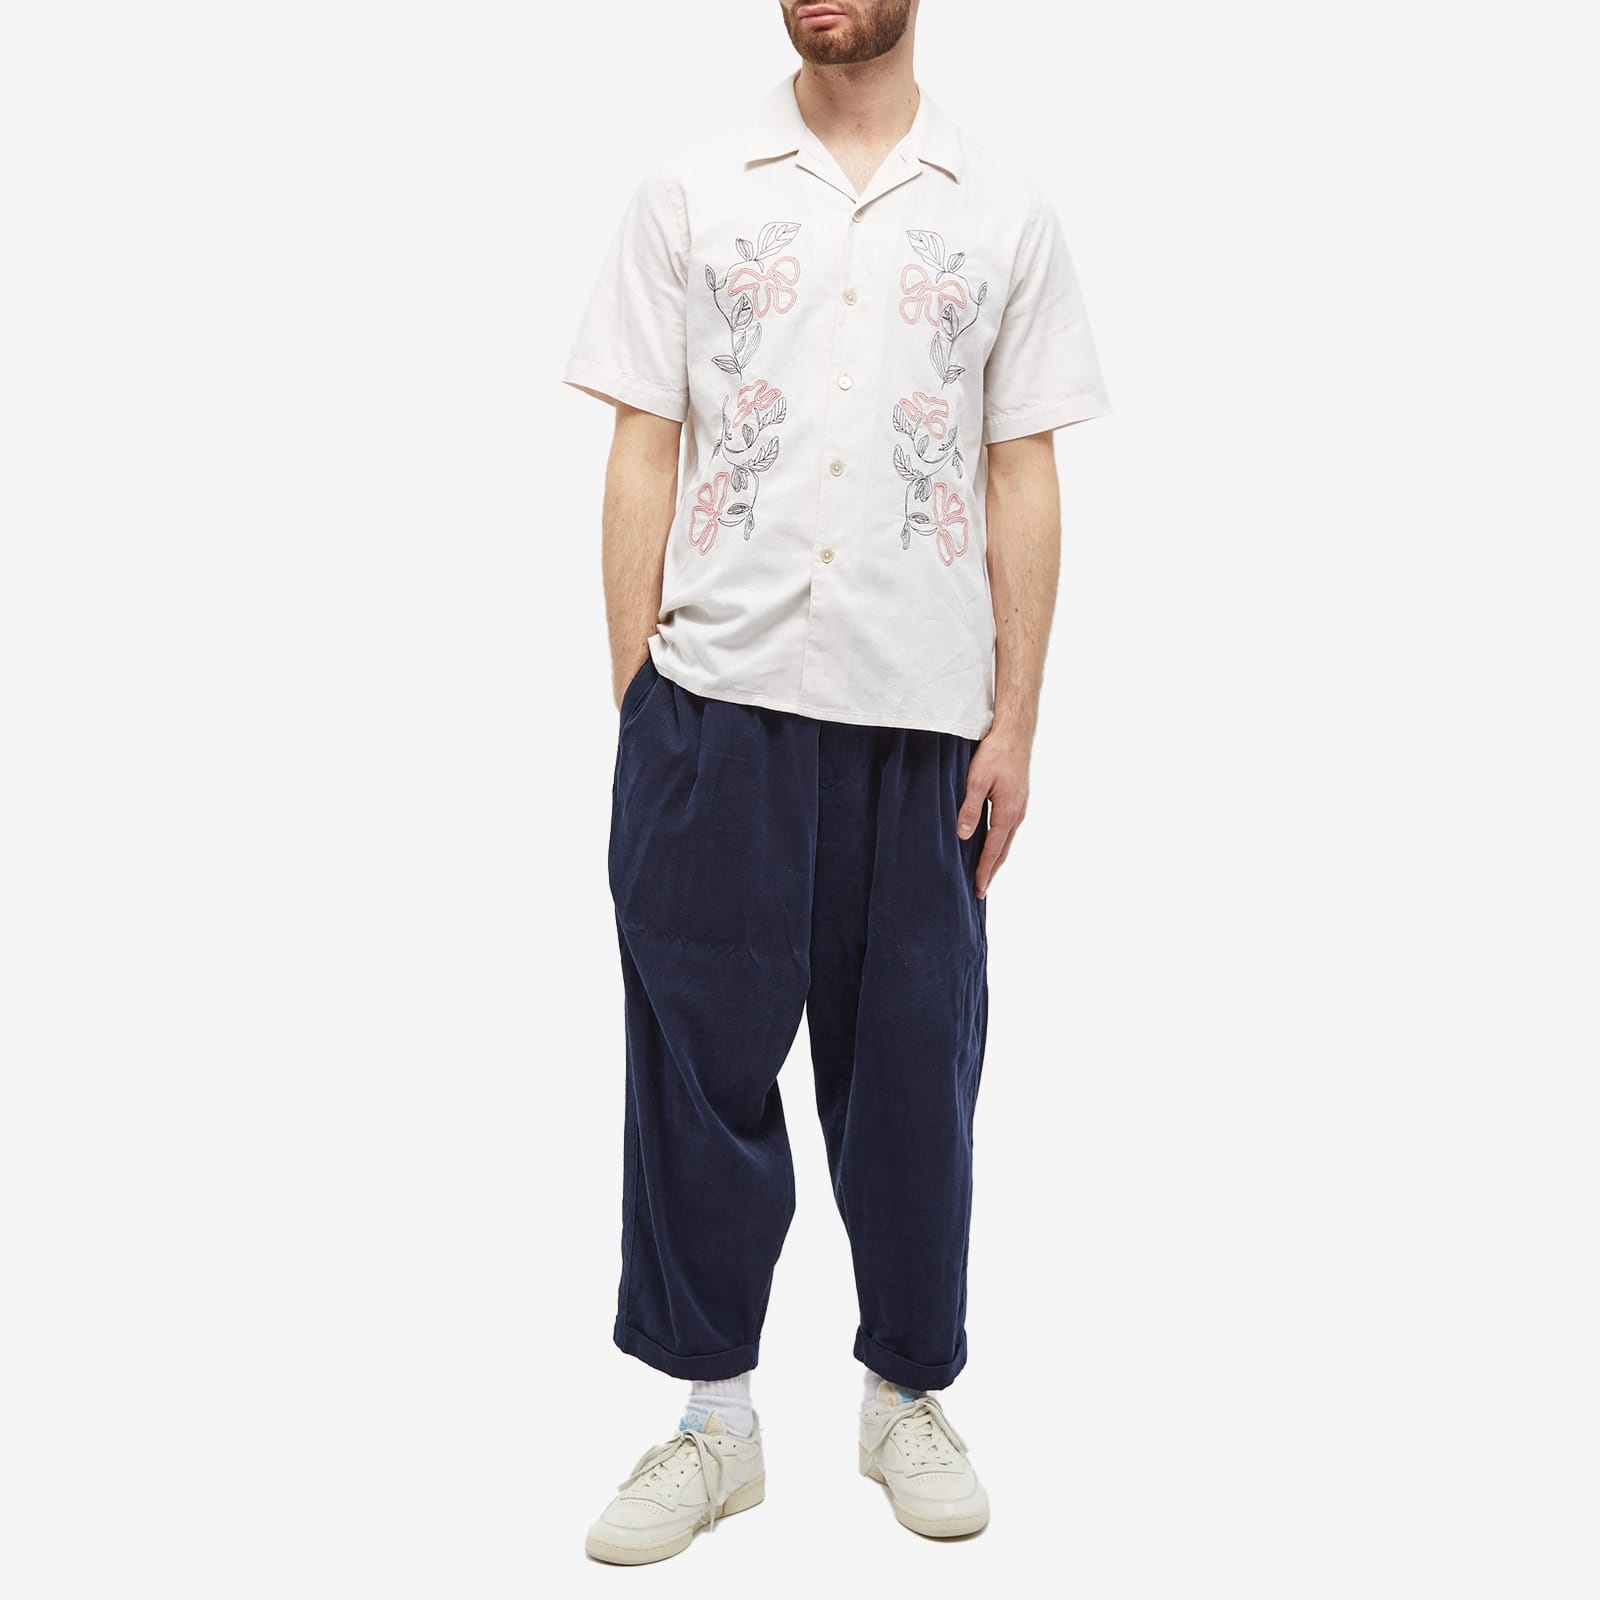 Paul Smith Embroidered Vacation Shirt - 4